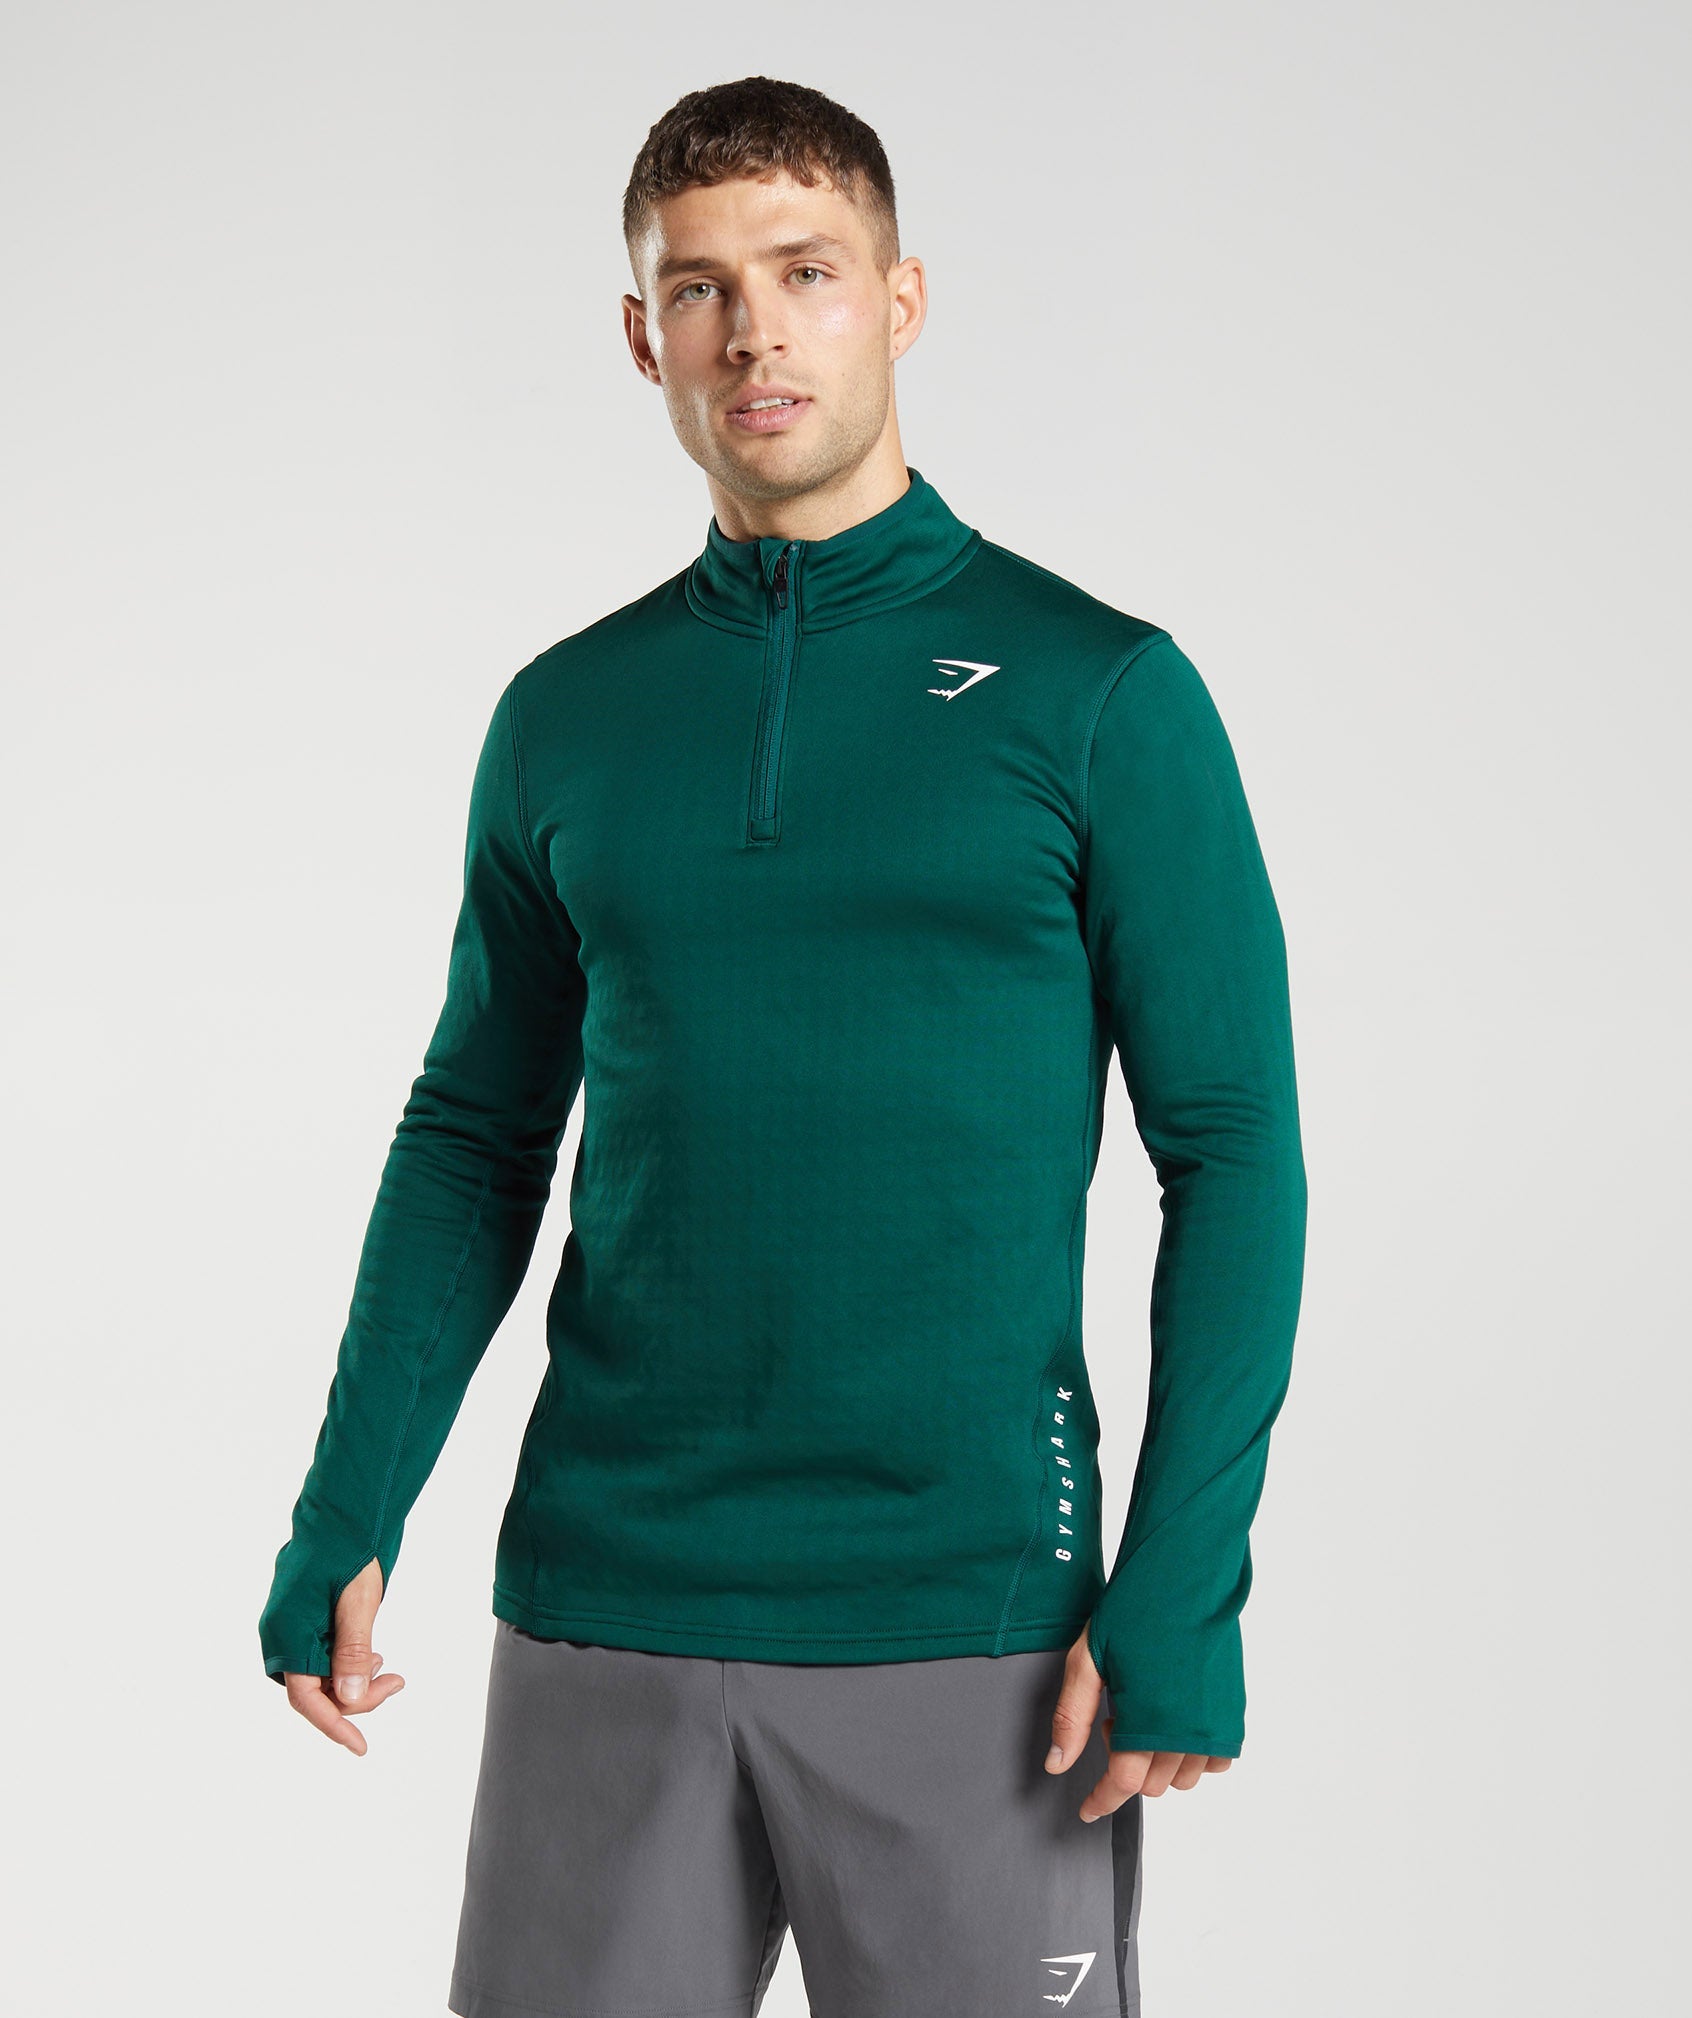 Sport 1/4 Zip in Woodland Green is out of stock